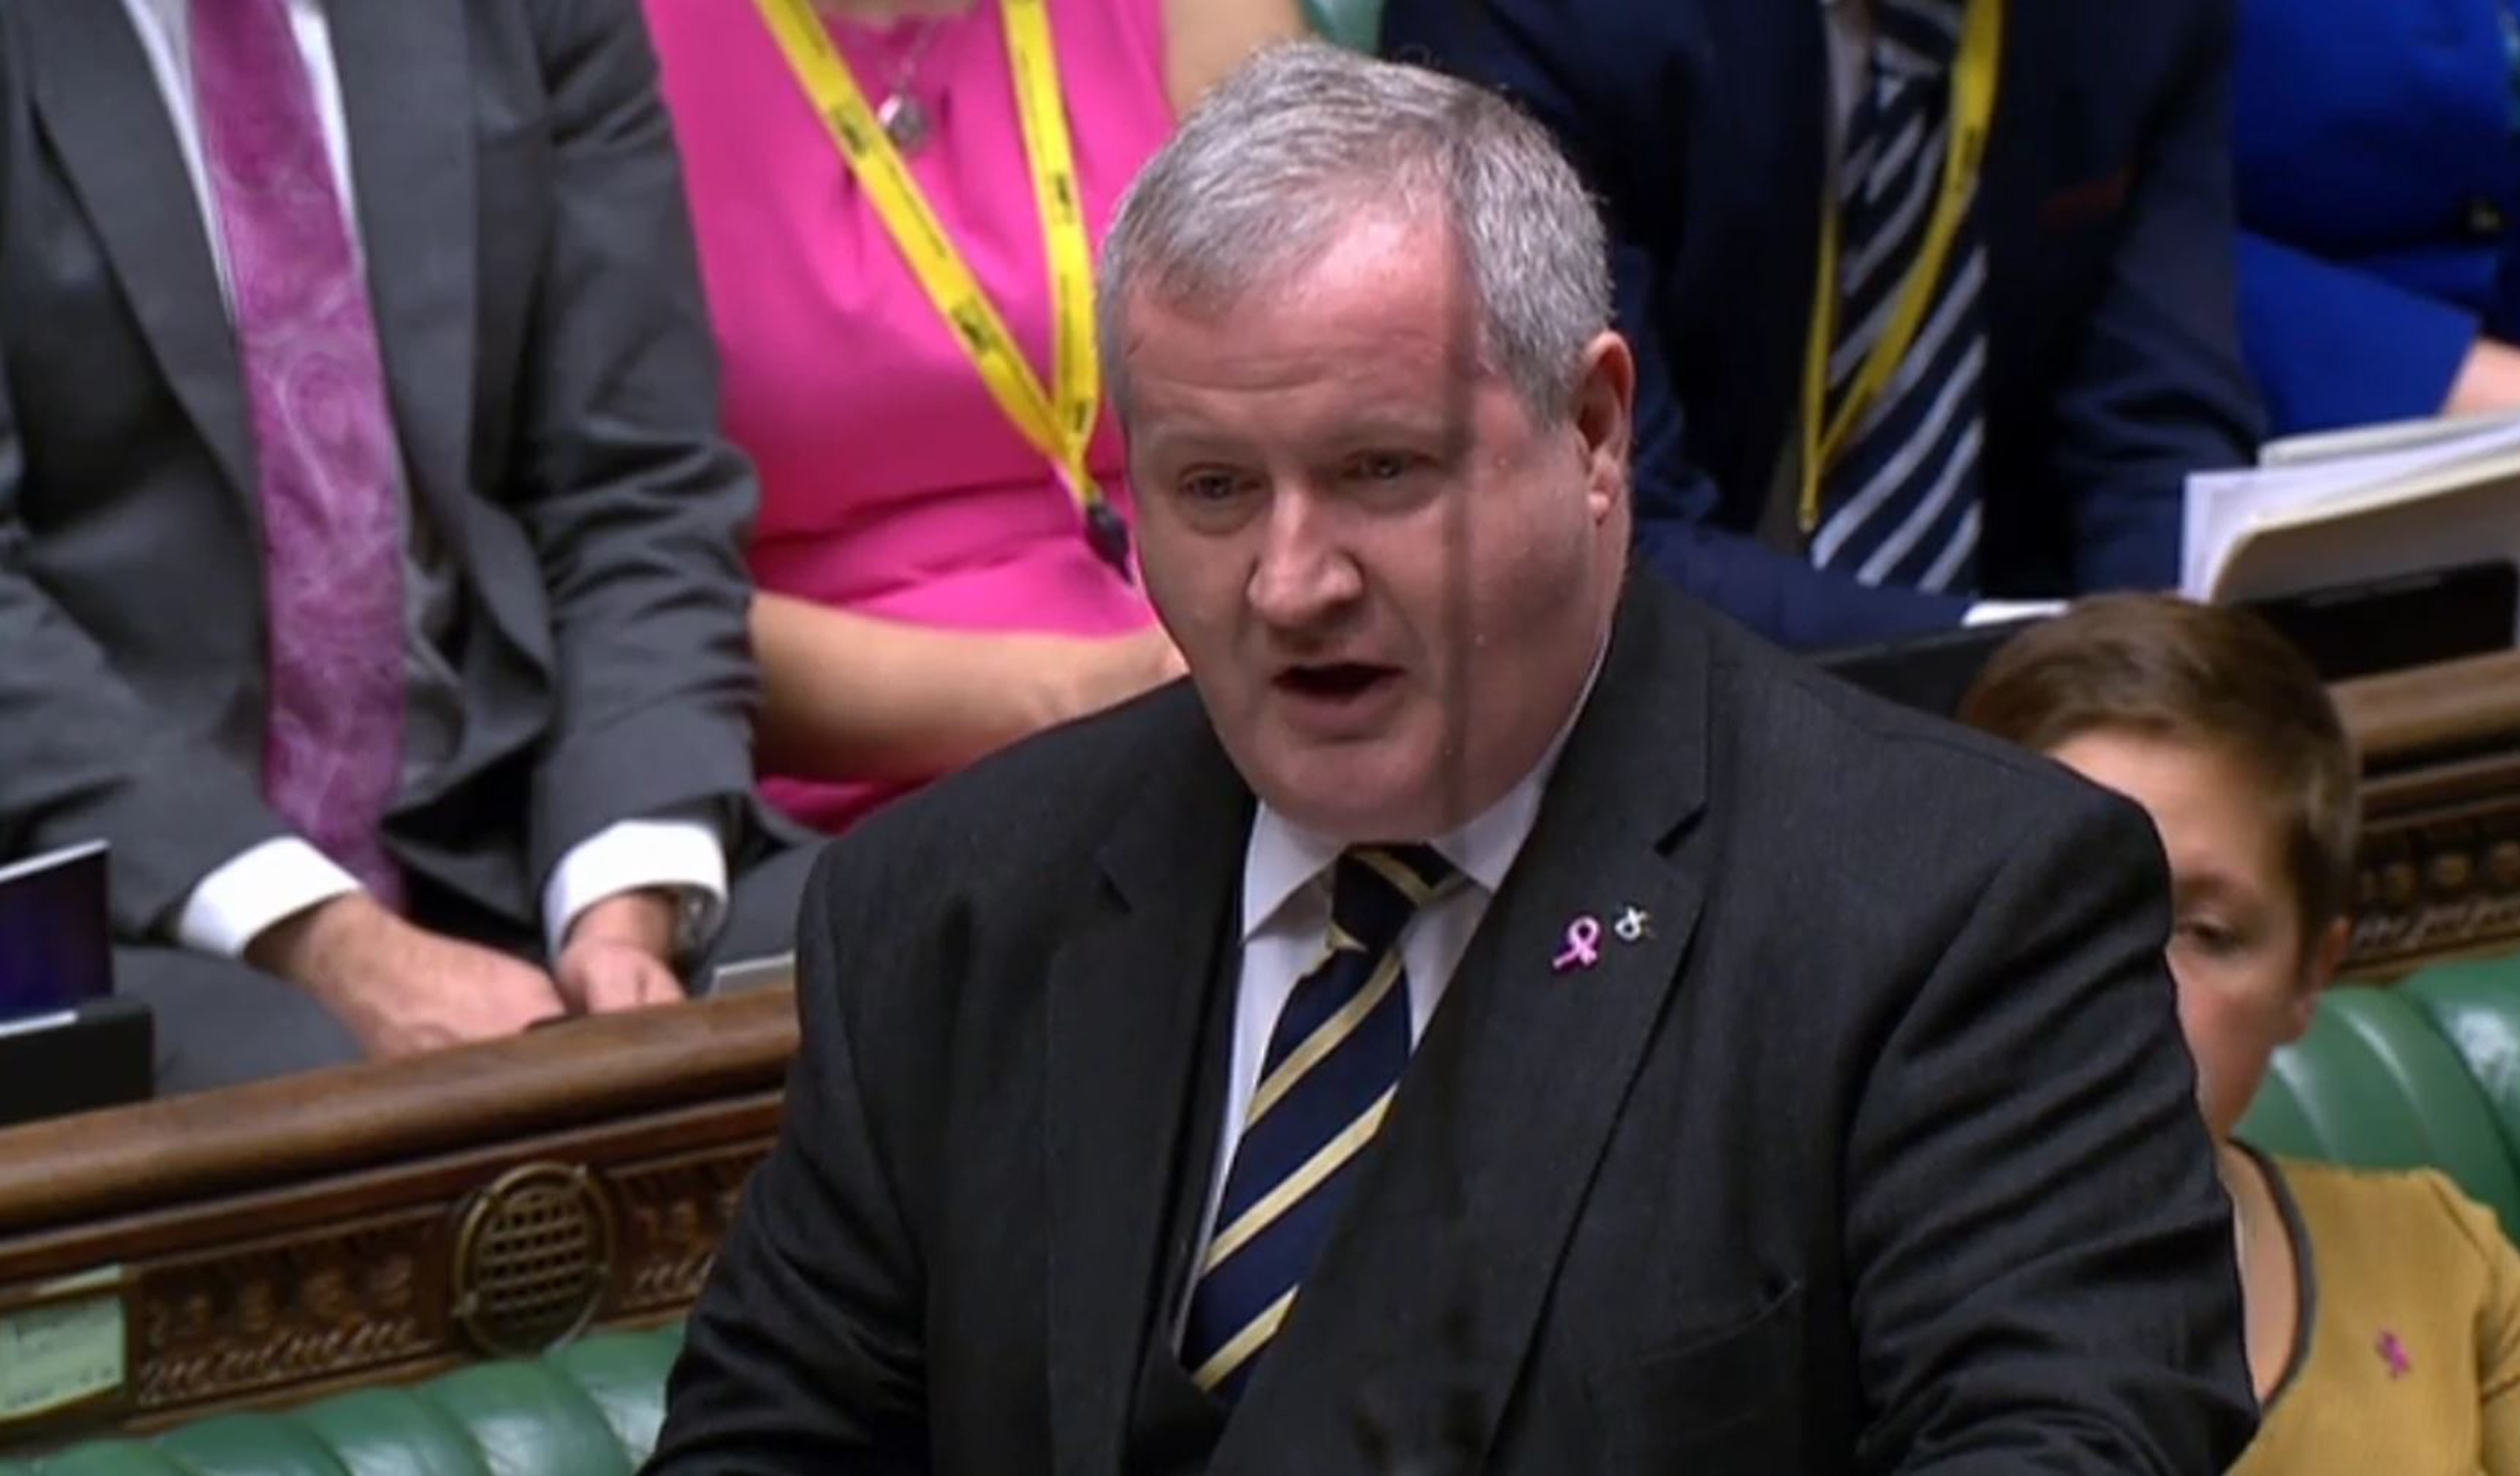 SNP Westminster leader Ian Blackford said policies would be in place that will allow for the future development of farming.